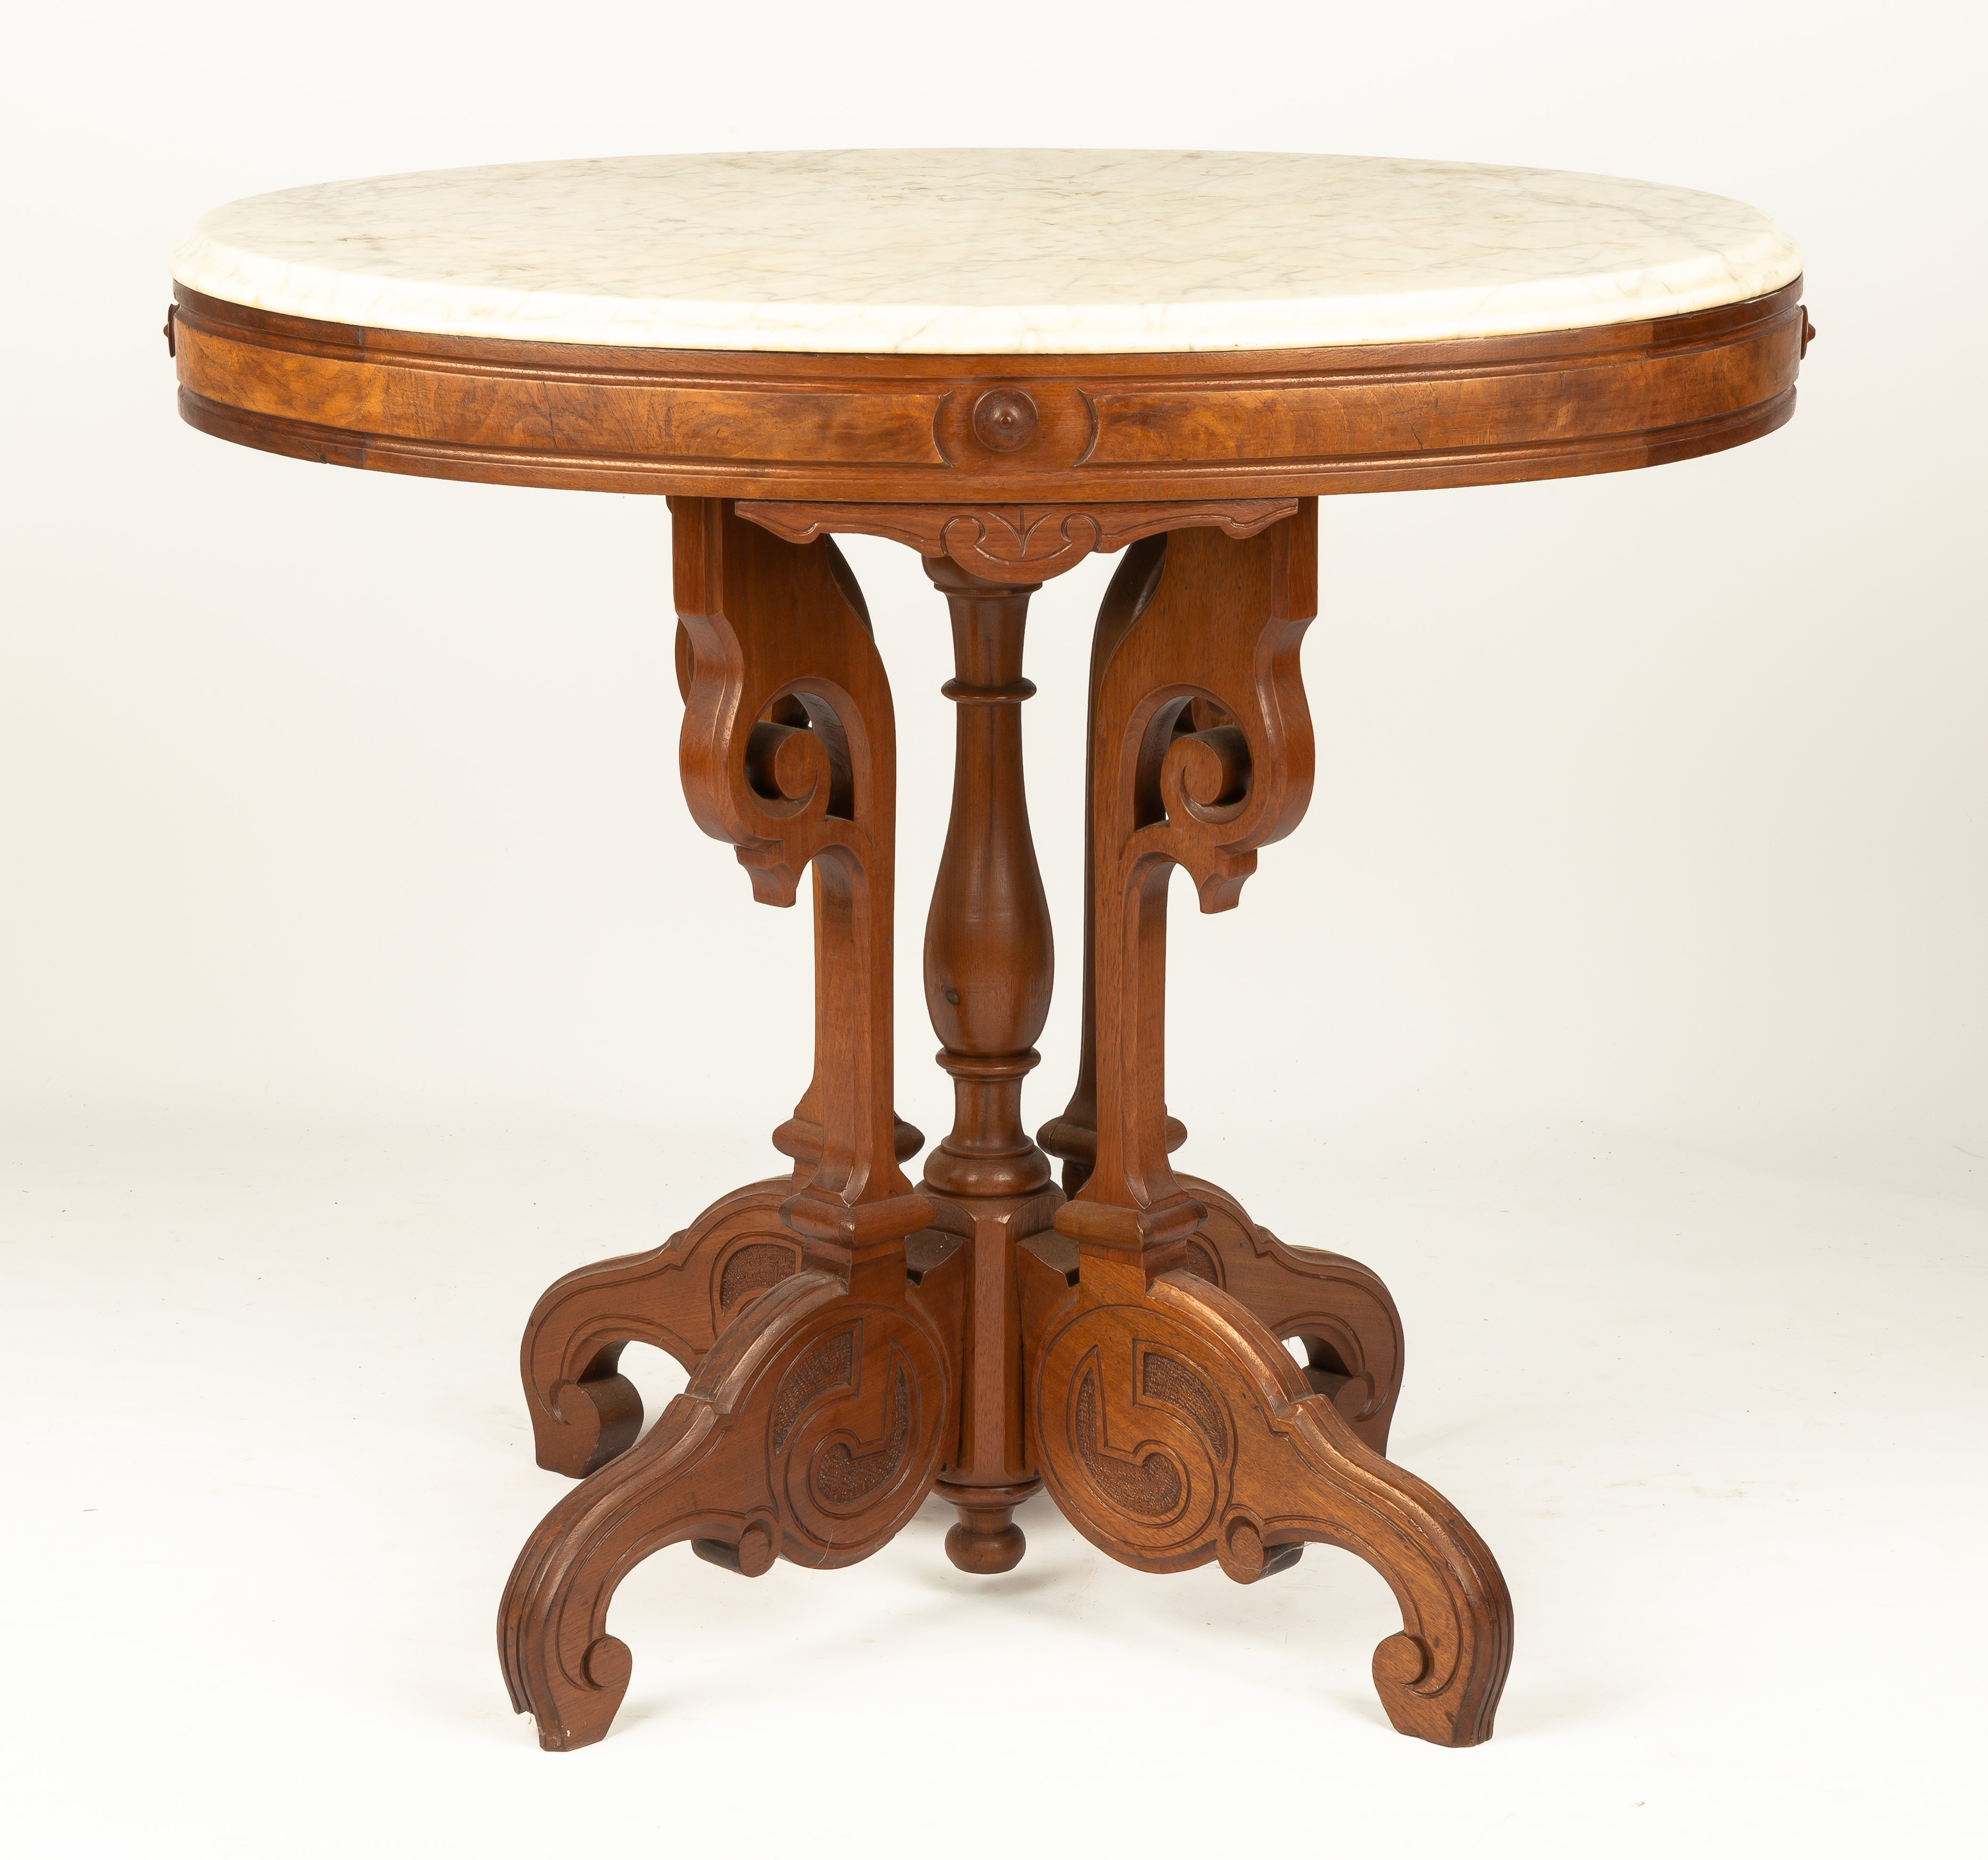 OVAL MARBLE-TOP WALNUT TABLE Oval